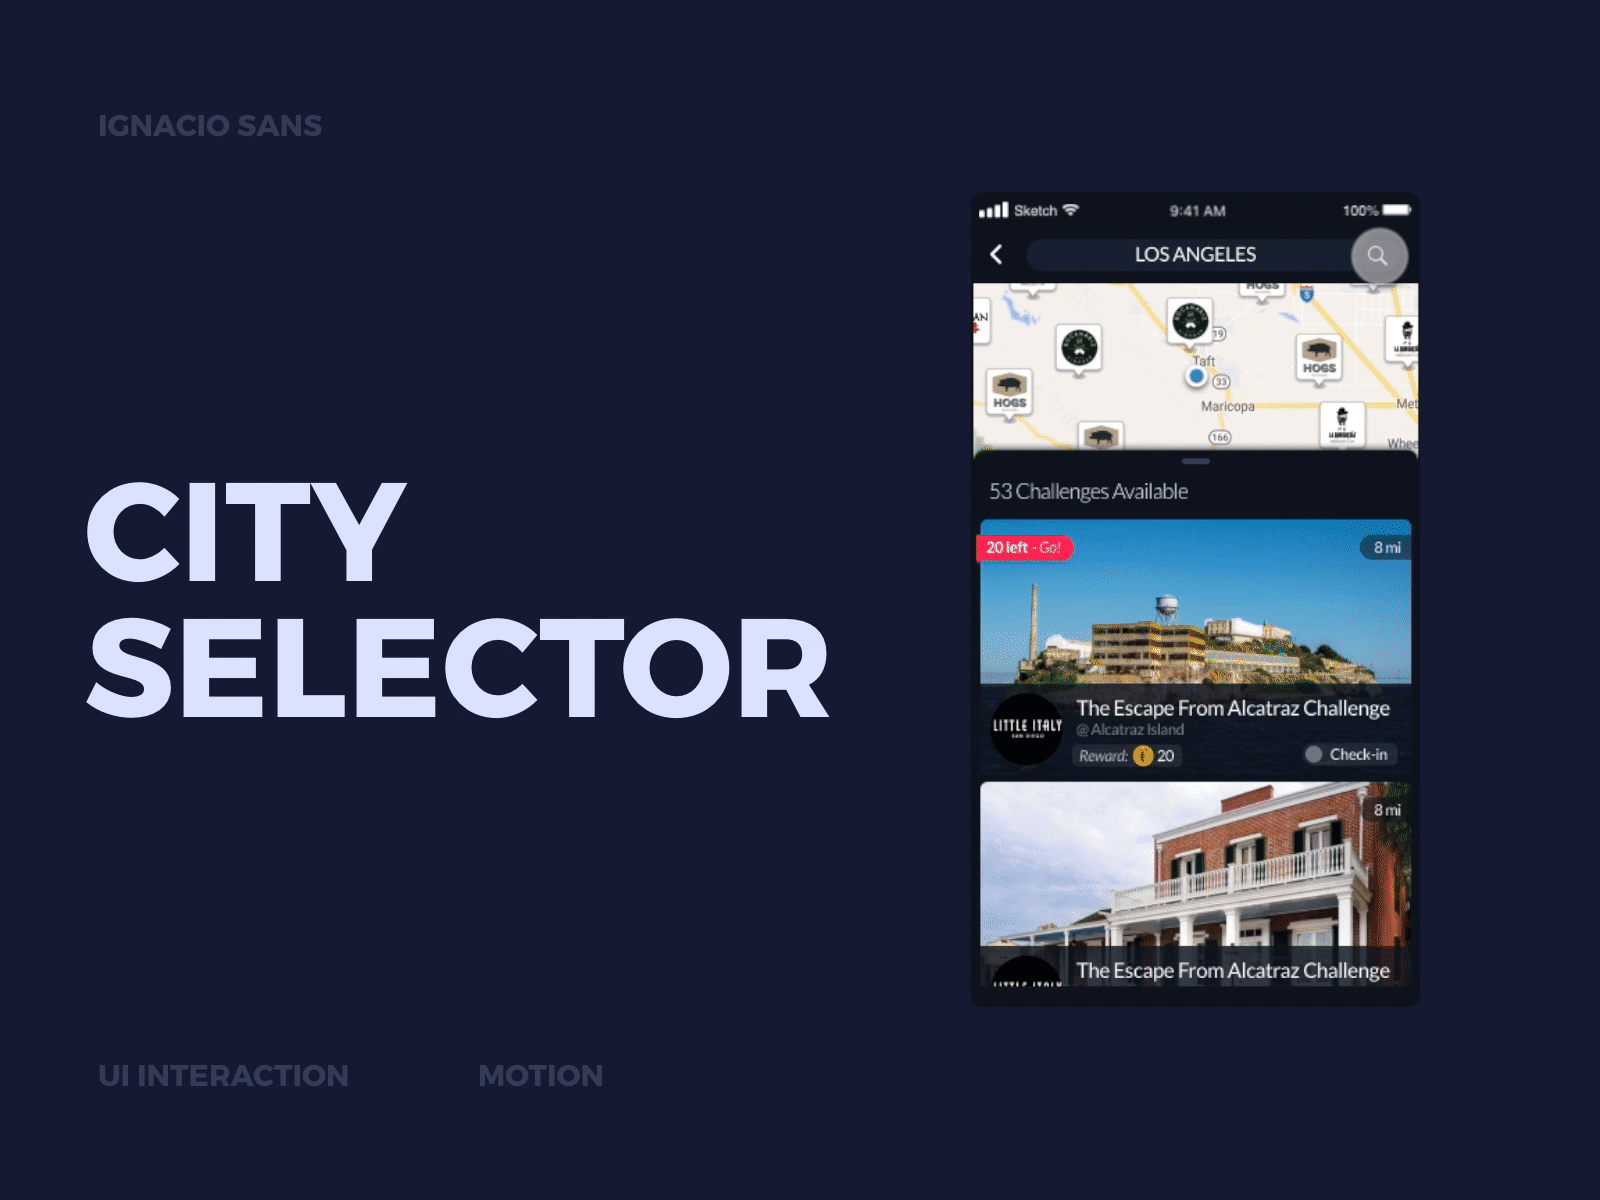 City Selector Animation android app city country design design app interaction ios location mobile mobile app motion search ui ui design ui interaction user interaction user interface userinterface ux